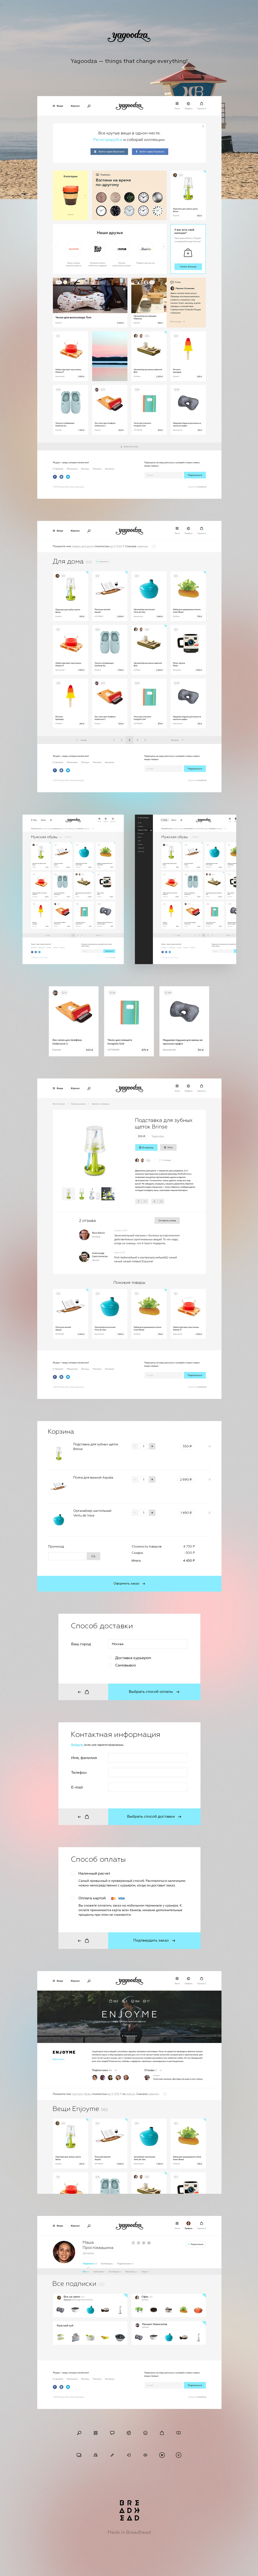 Web UI ux e-commerce gifts clean White